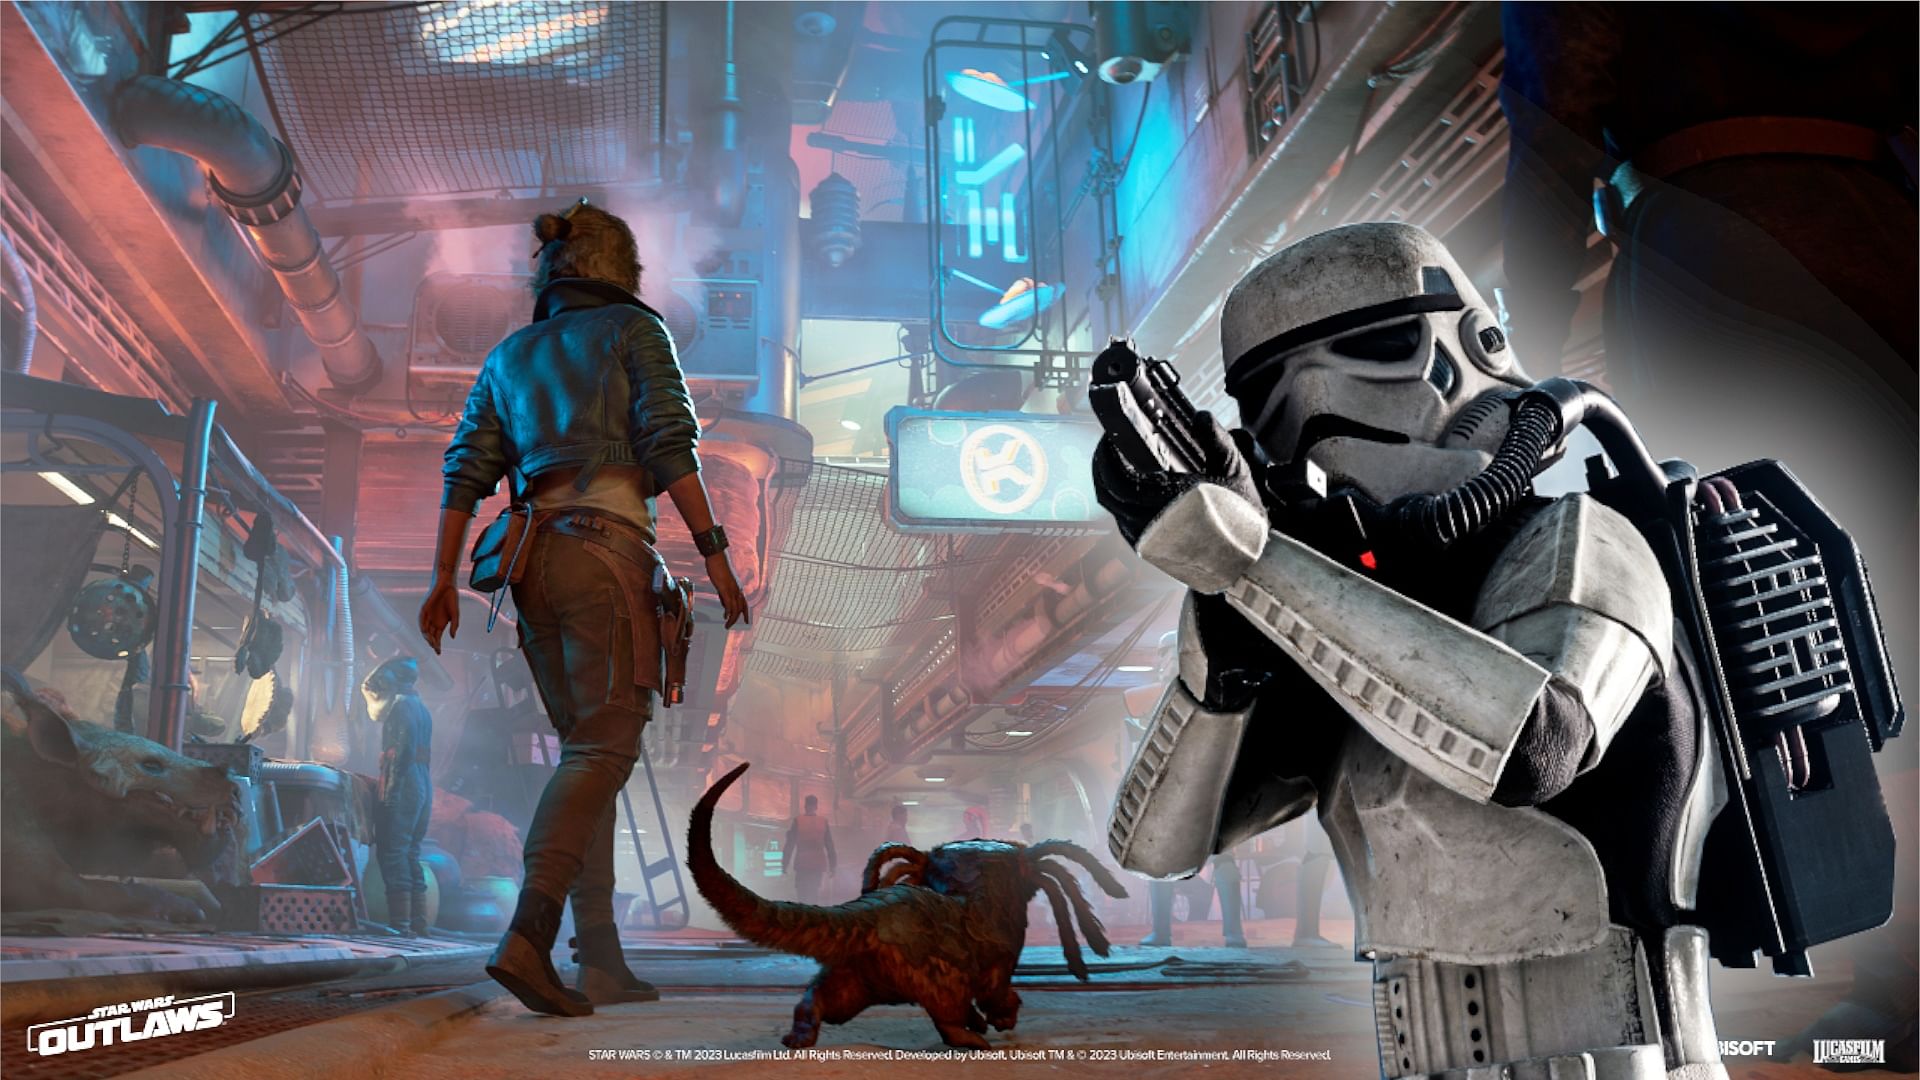 Star Wars Outlaws Will Emulate Original Trilogy's Style Using New Tech